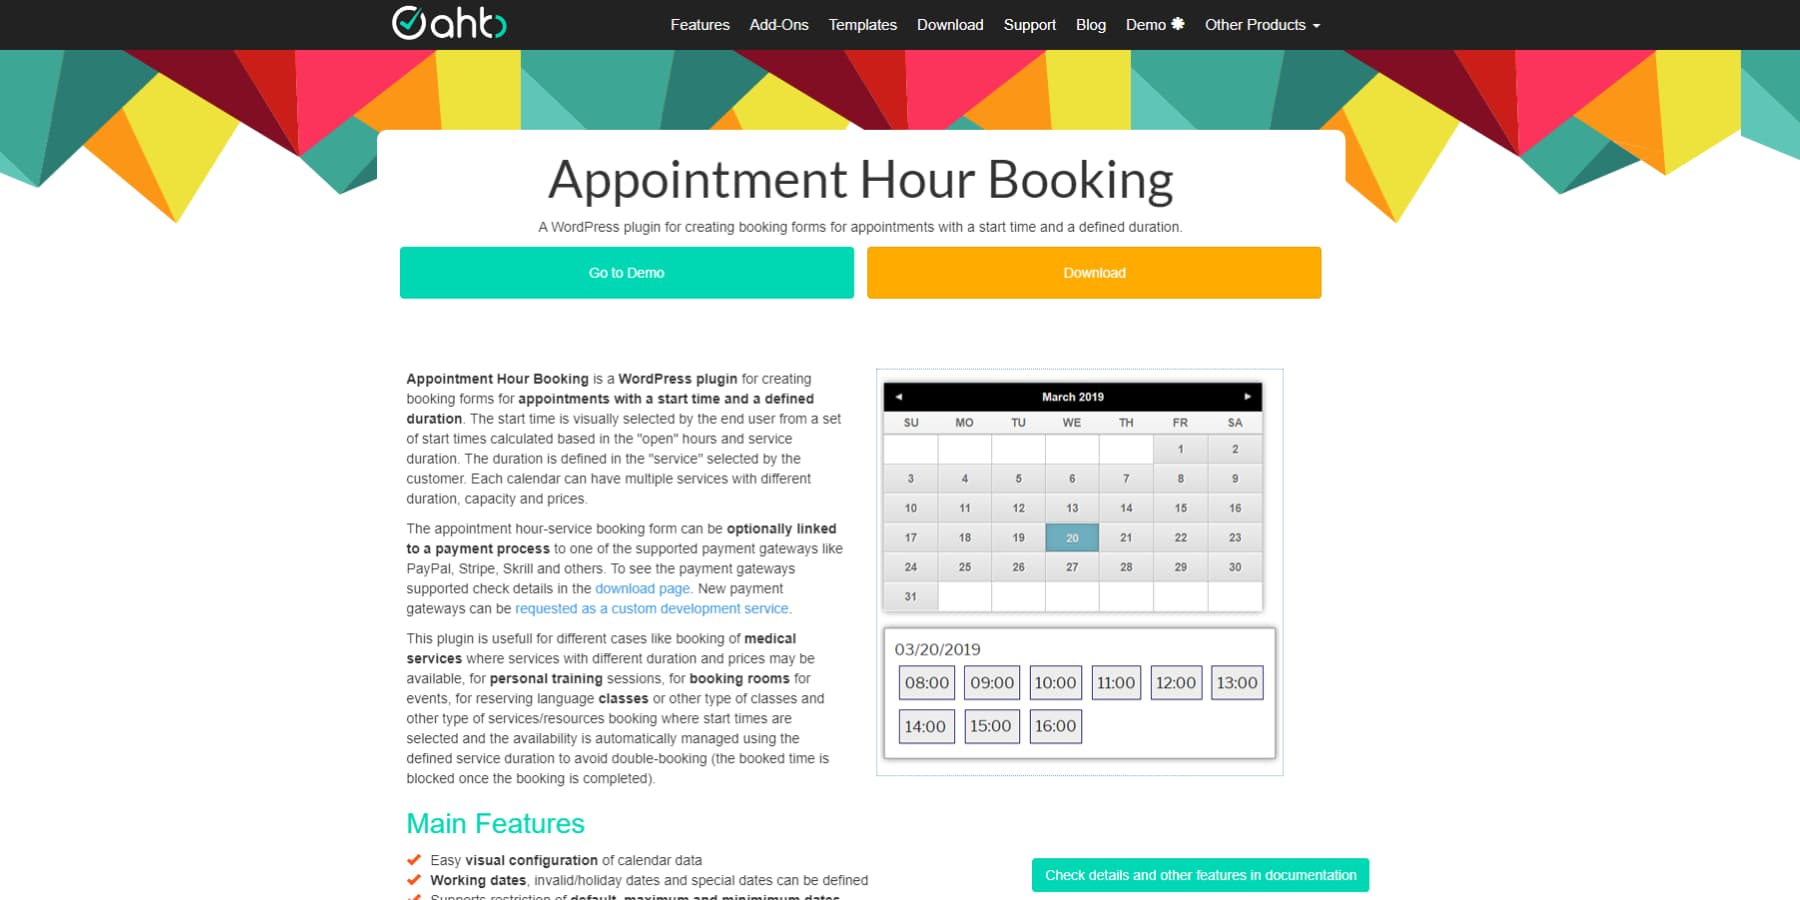 A screenshot of Appointment Hour Booking's home